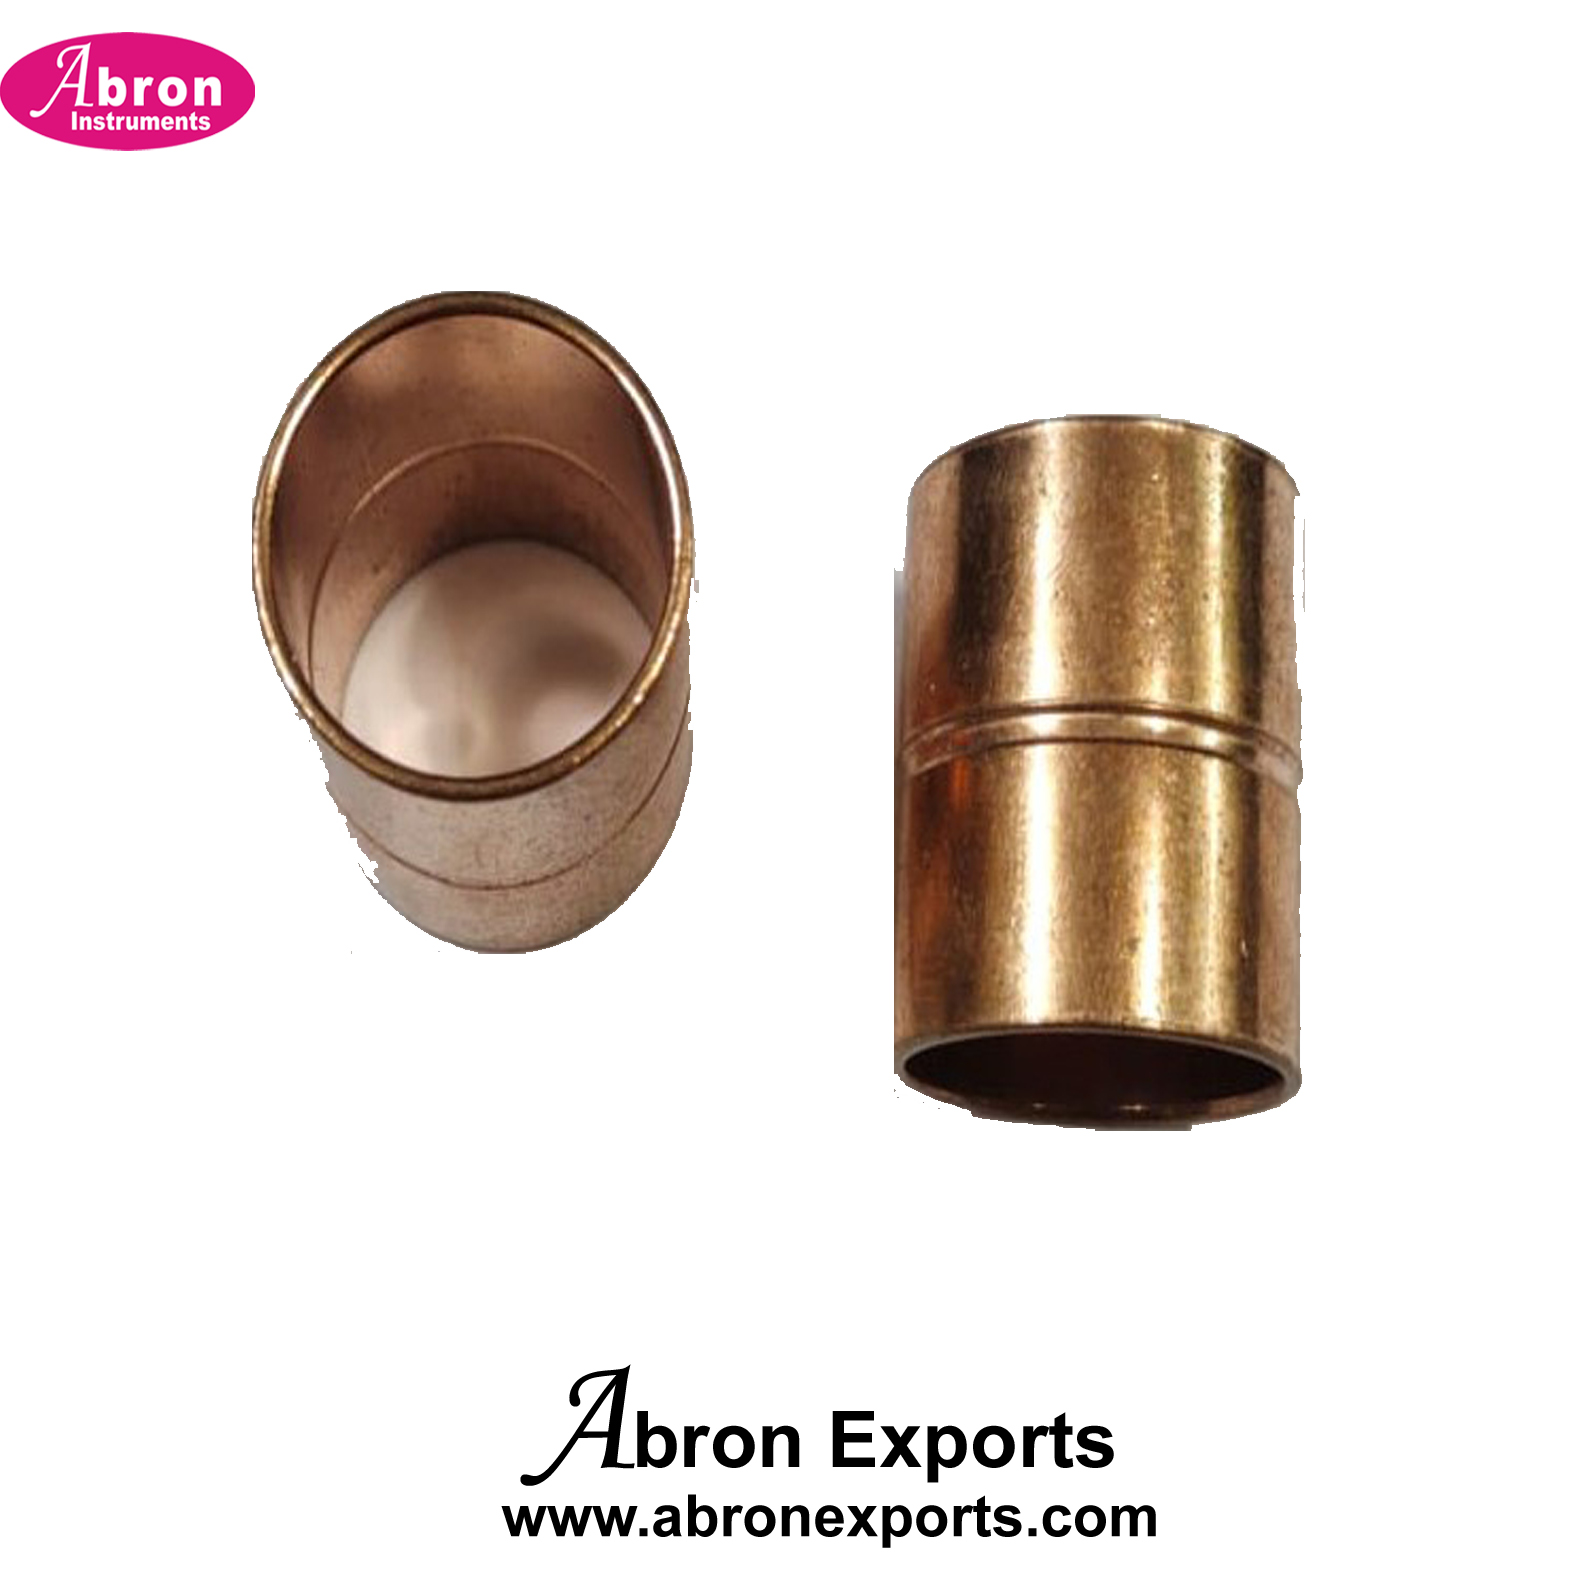 Medical gas Pipe Line spare Jointer copper 15mm or 22mm Pack of 100 each gas for pipeline installation Abron ABM-1121PJ15 